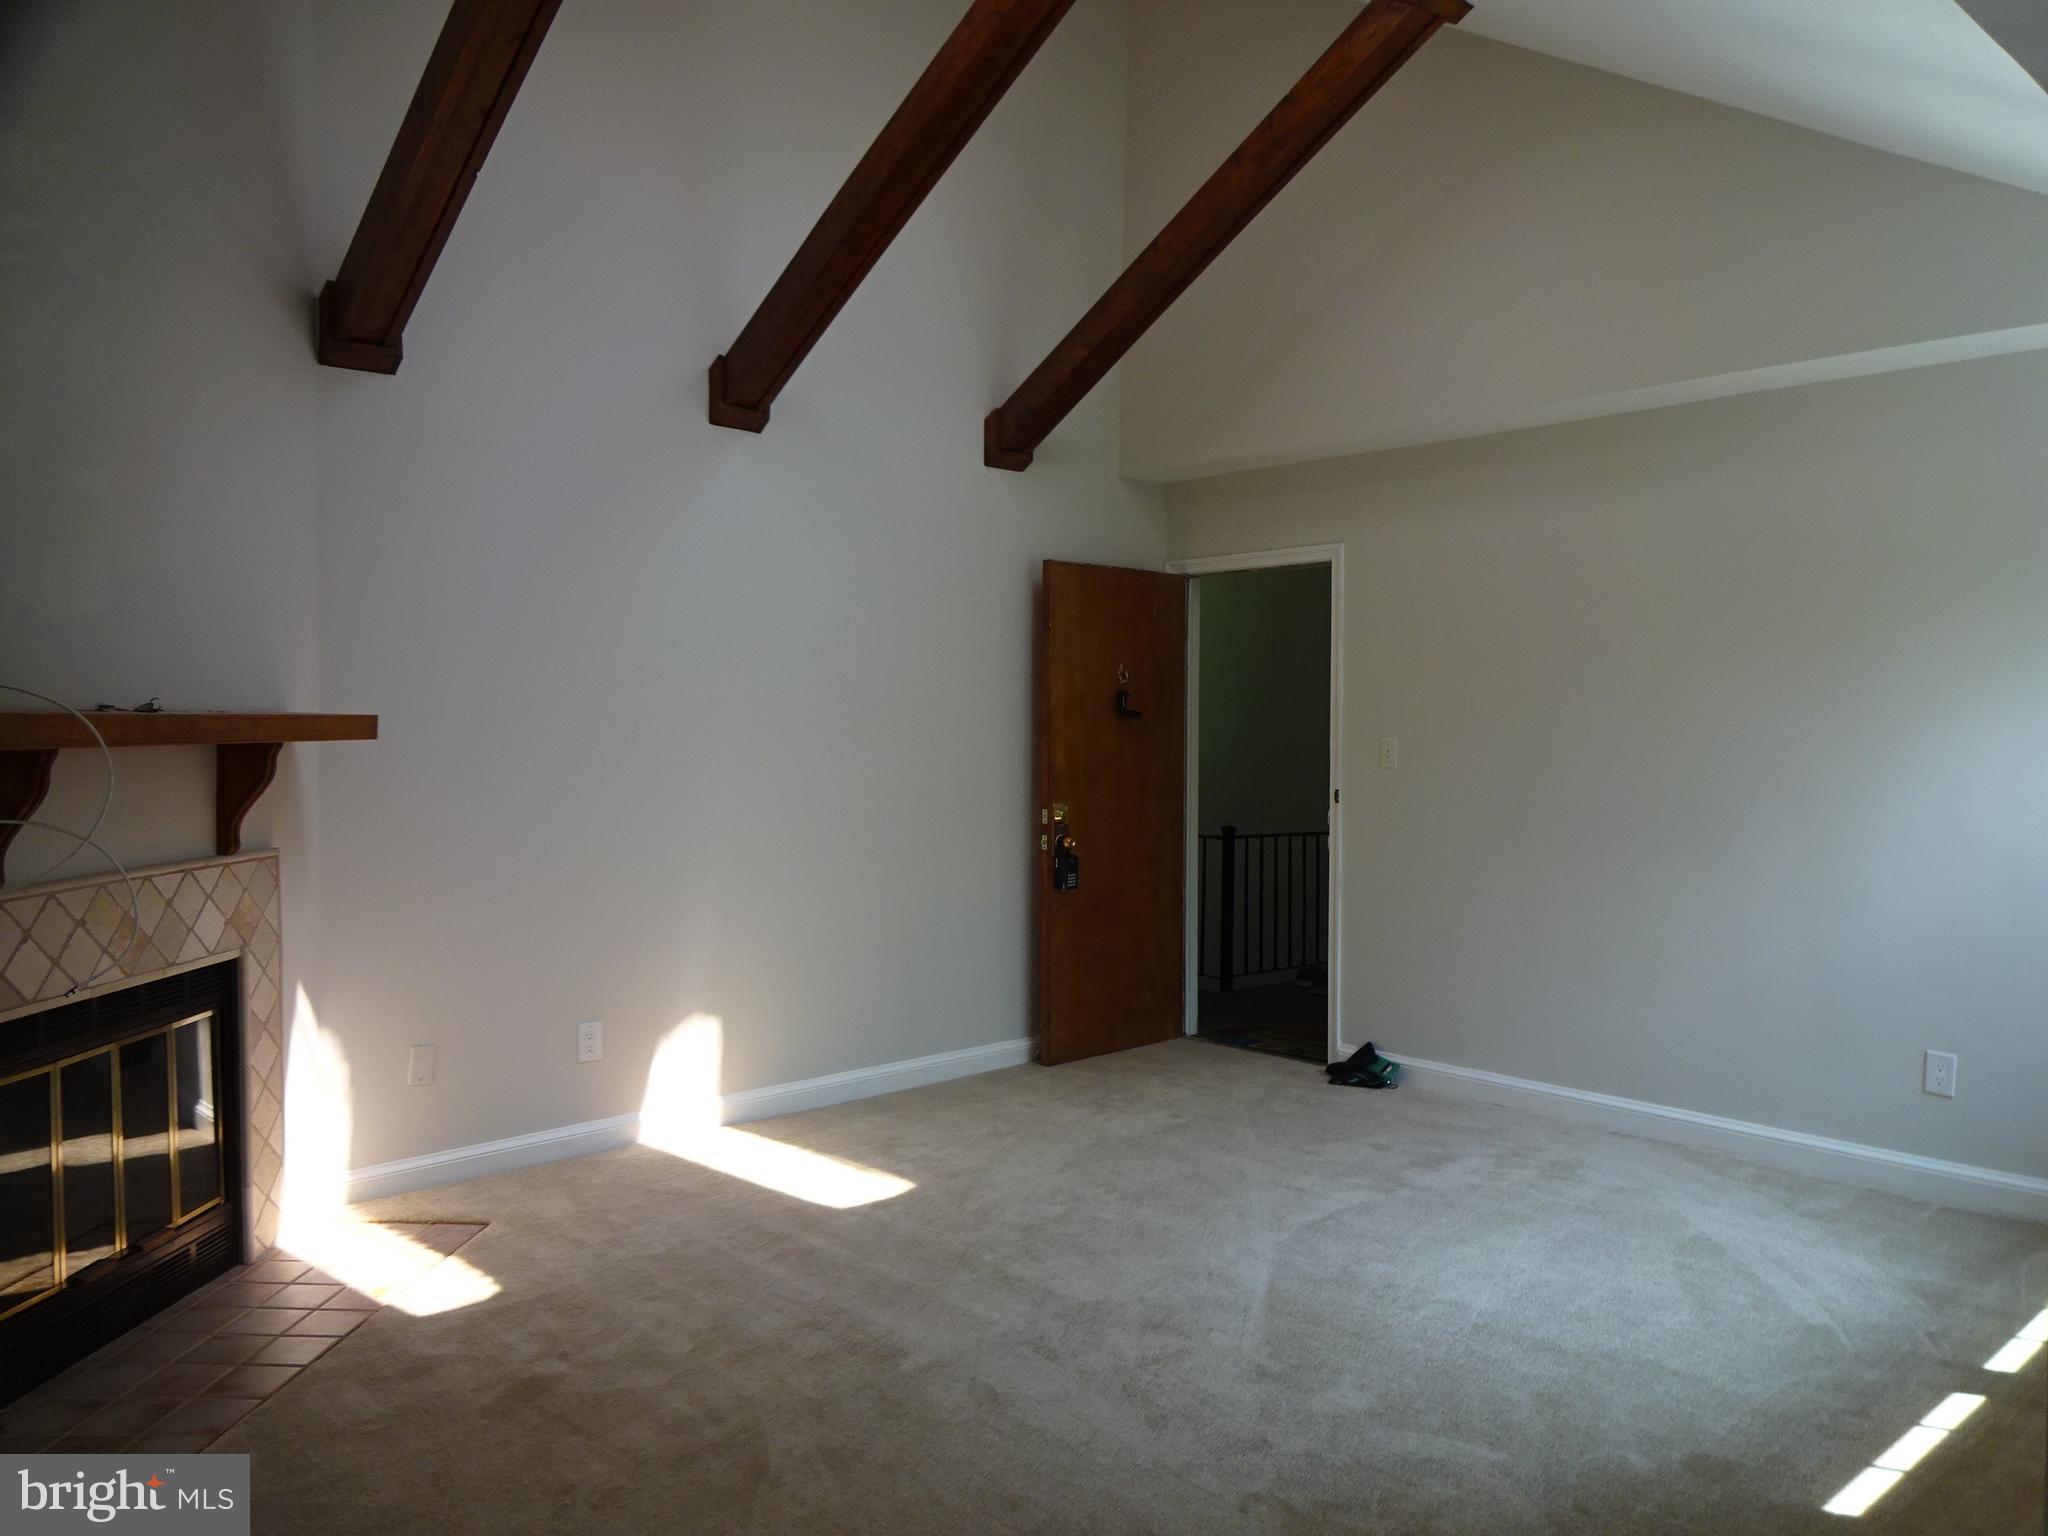 a view of an empty room with a fireplace